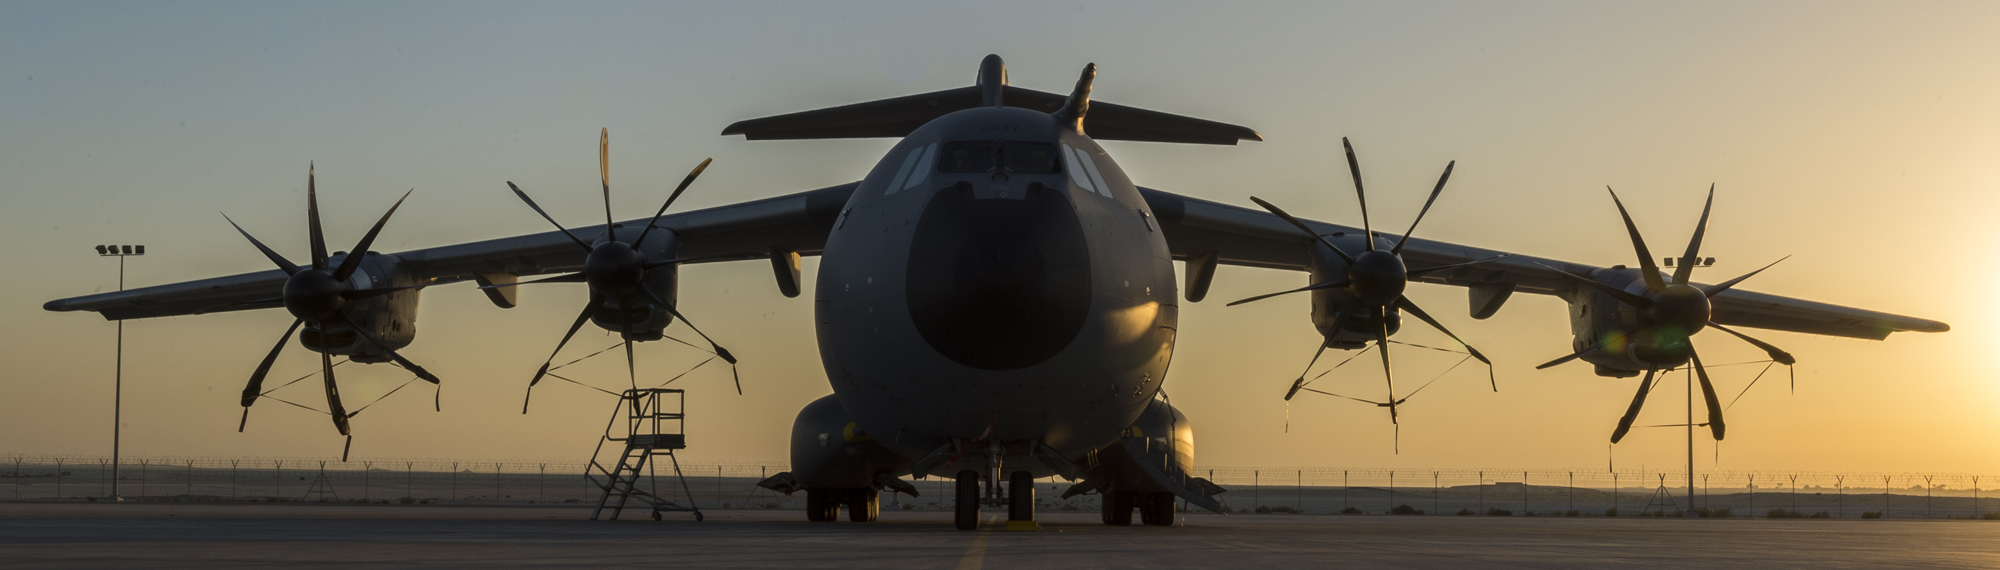 A400M and TP400-D6 engines on military base